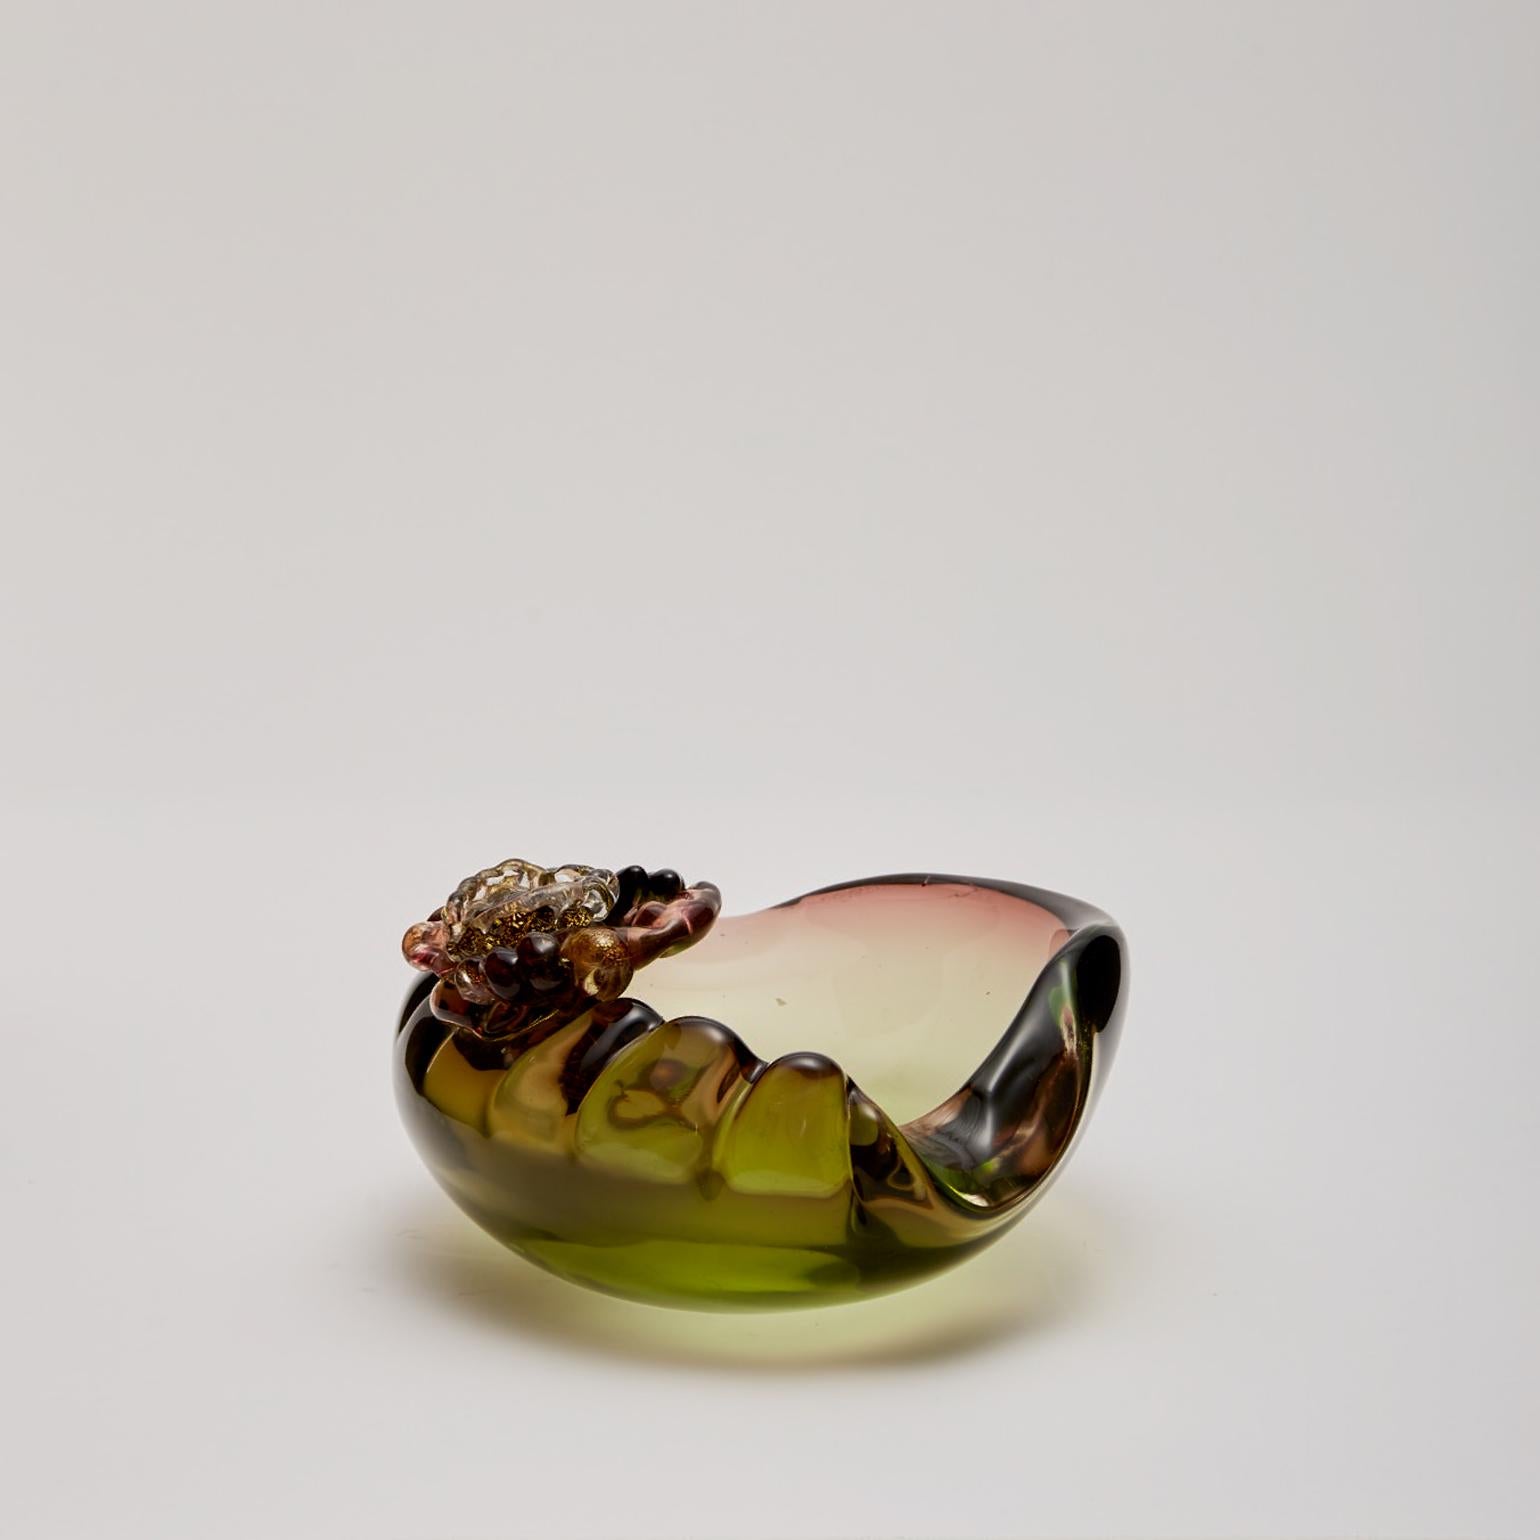 Art Glass Sea Shell Sculpture with Crab Blown Glass by Alfredo Barbini For Sale